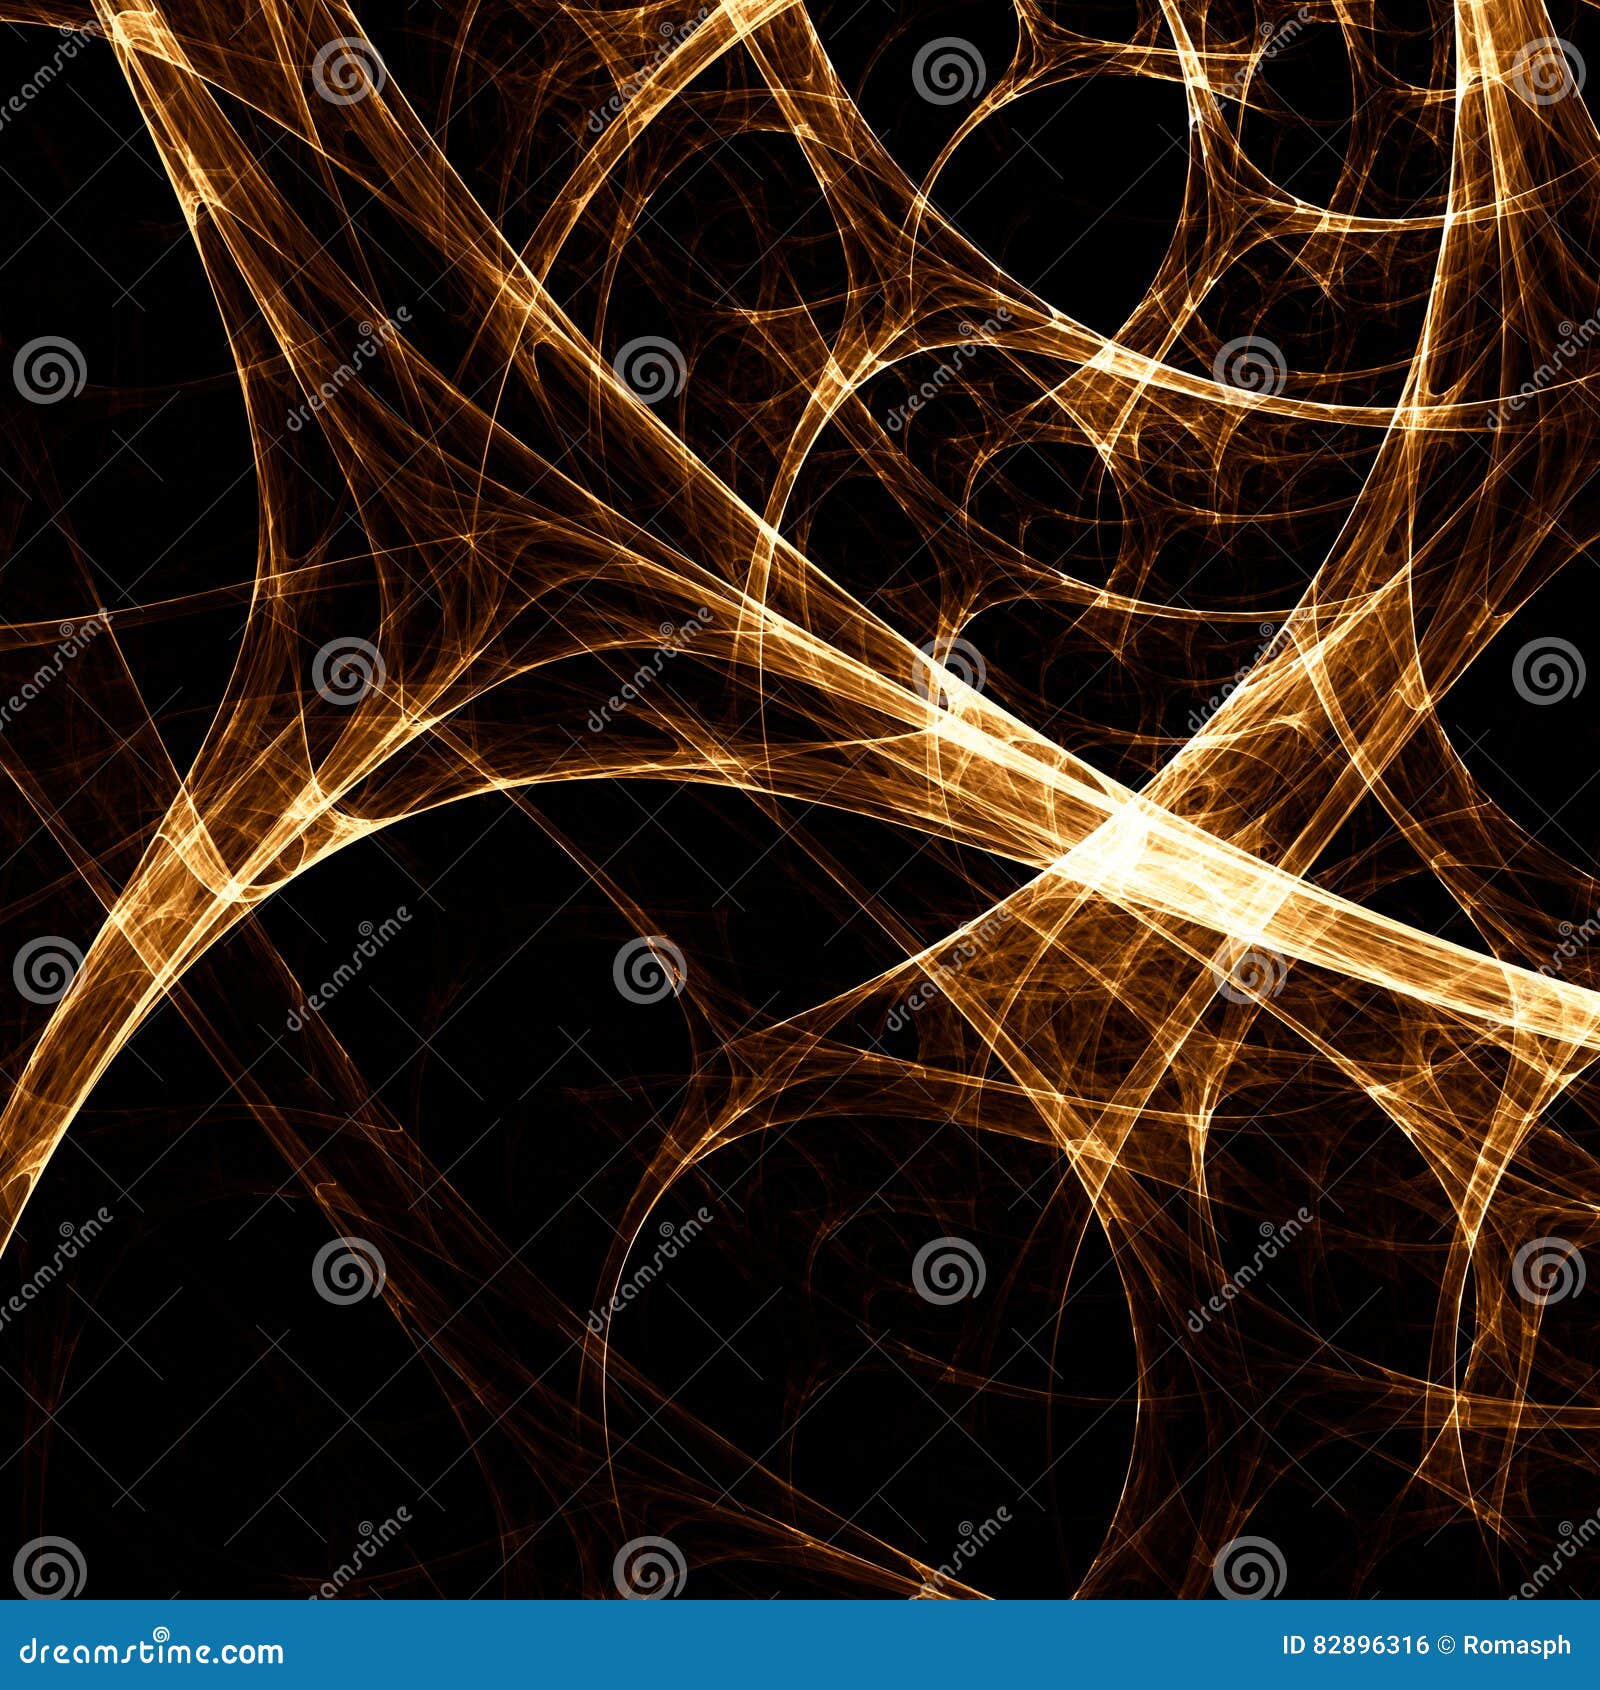 Beautiful Abstract Image. Computer Generated Pattern Stock Photo ...